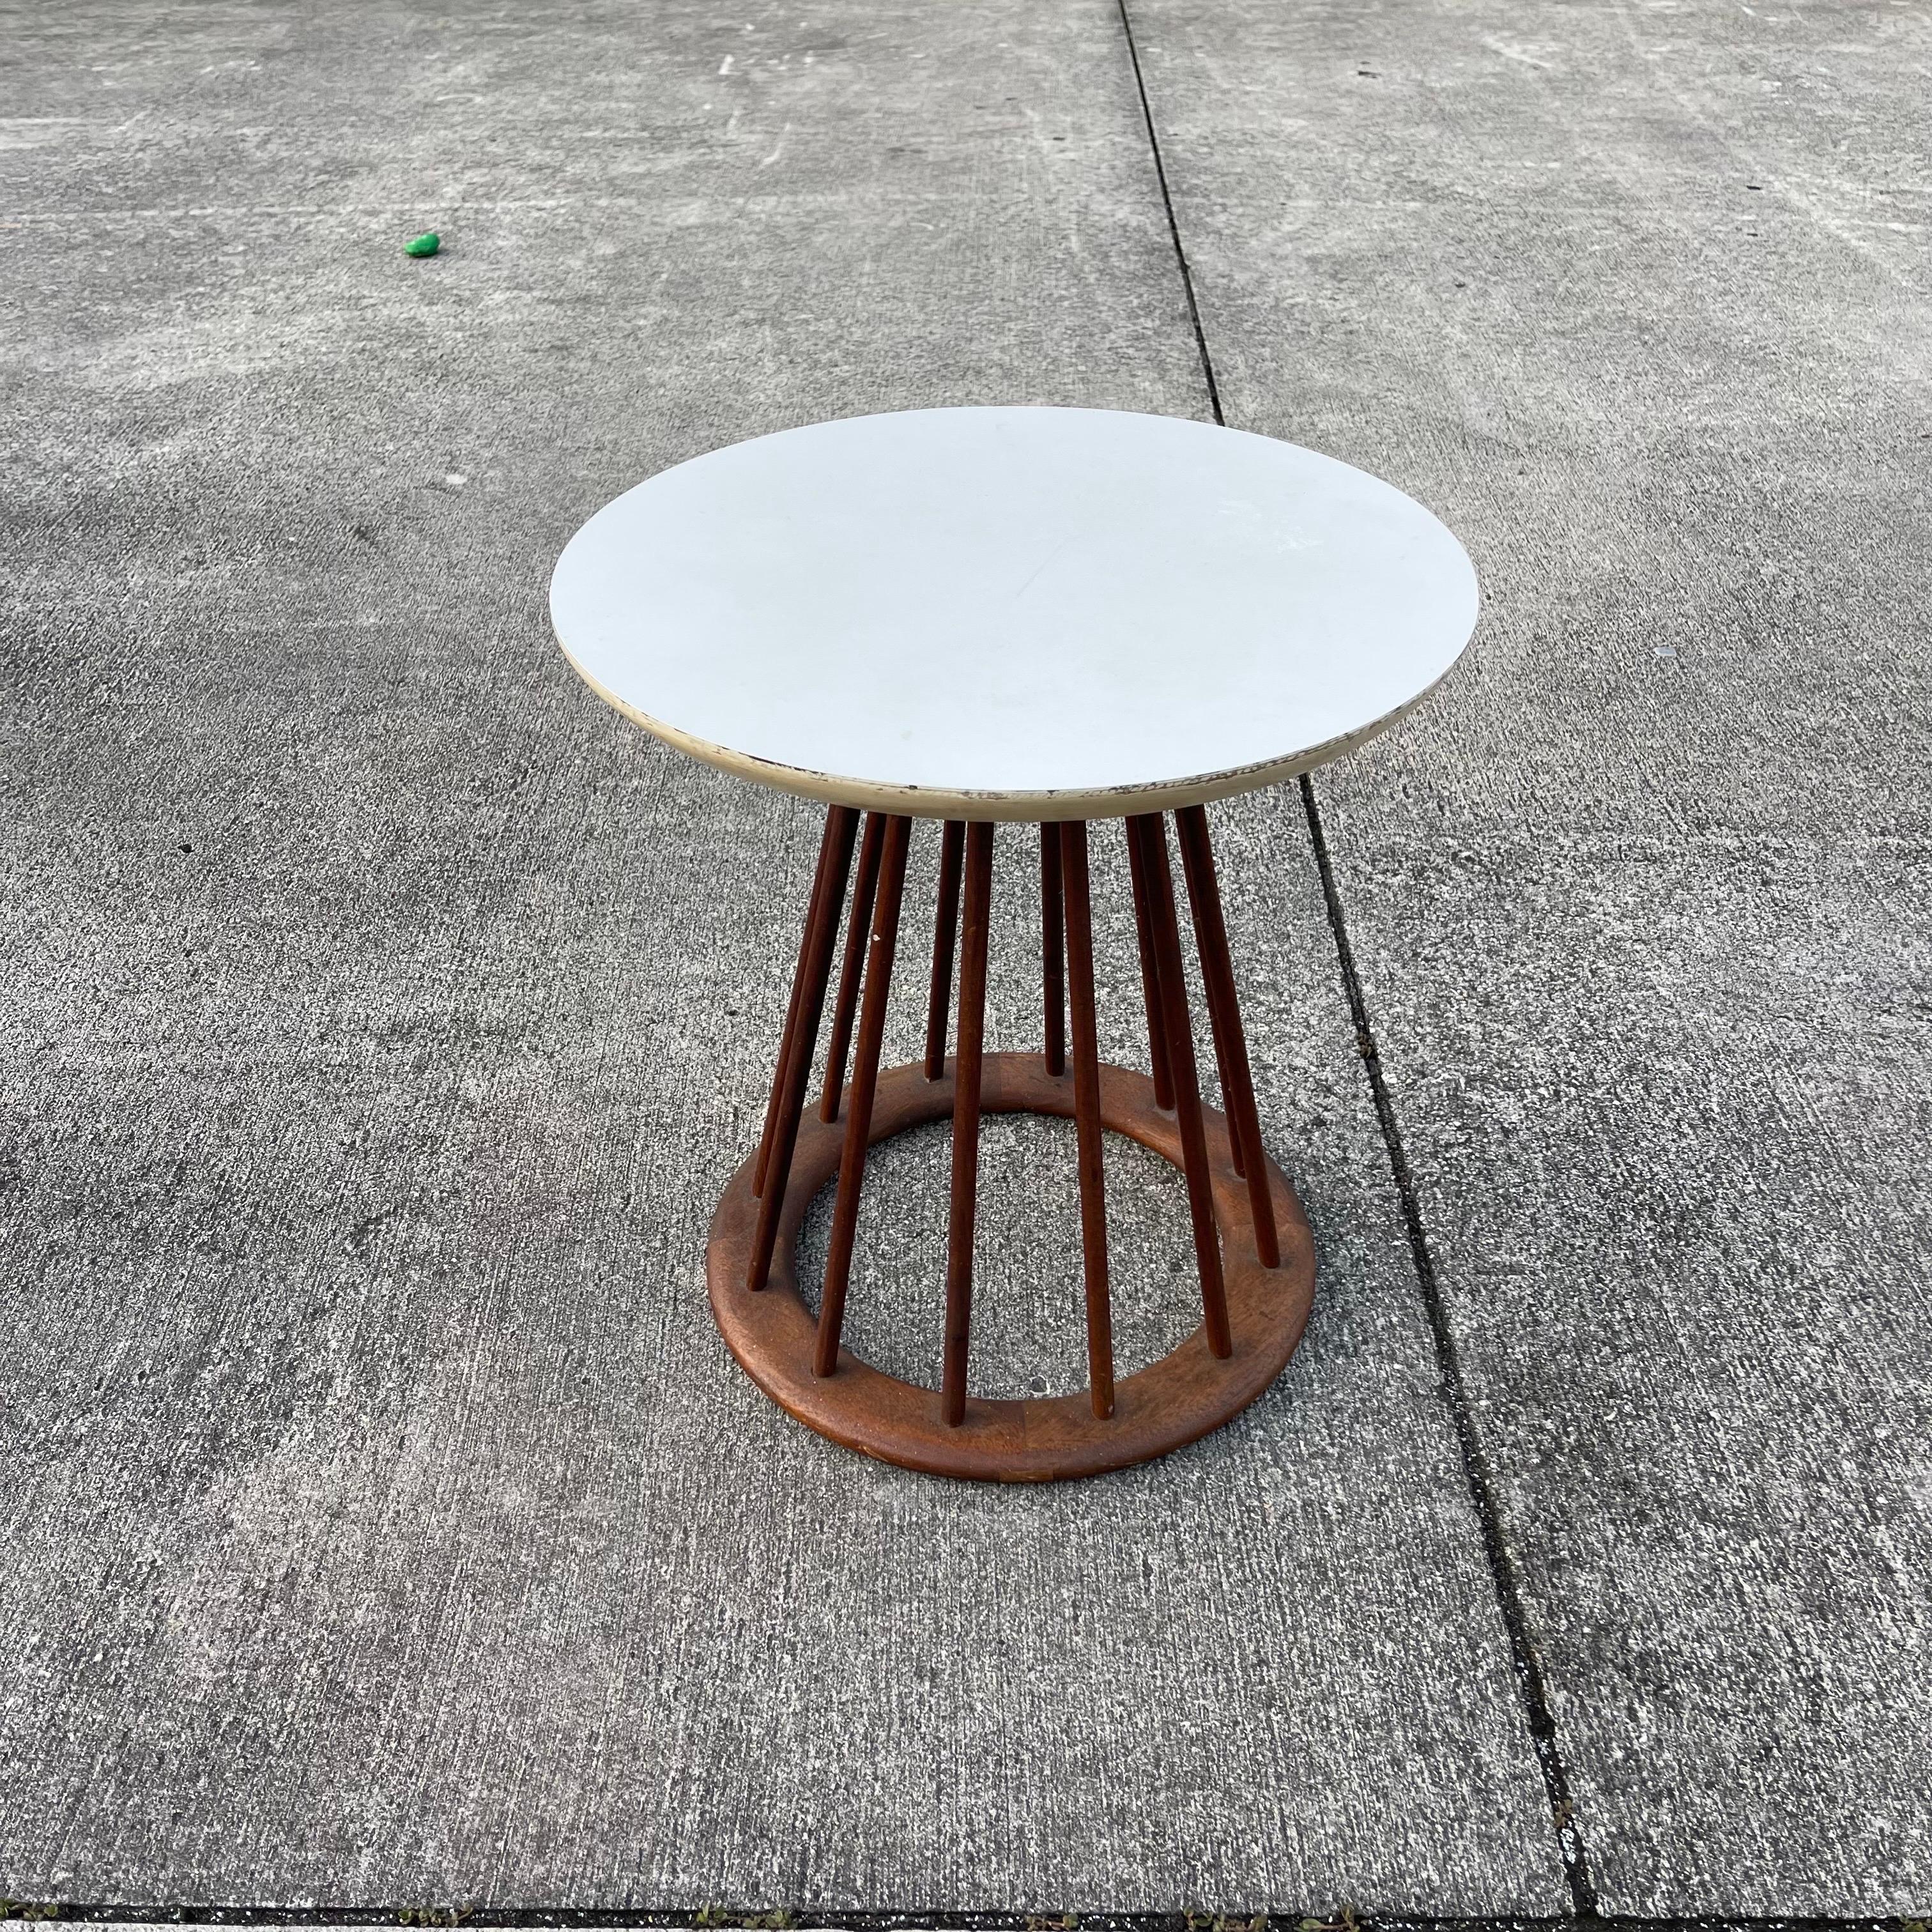 Arthur Umanoff Walnut Spindle Side Table, Mid-Century Modern c.1960s In Good Condition For Sale In Jensen Beach, FL